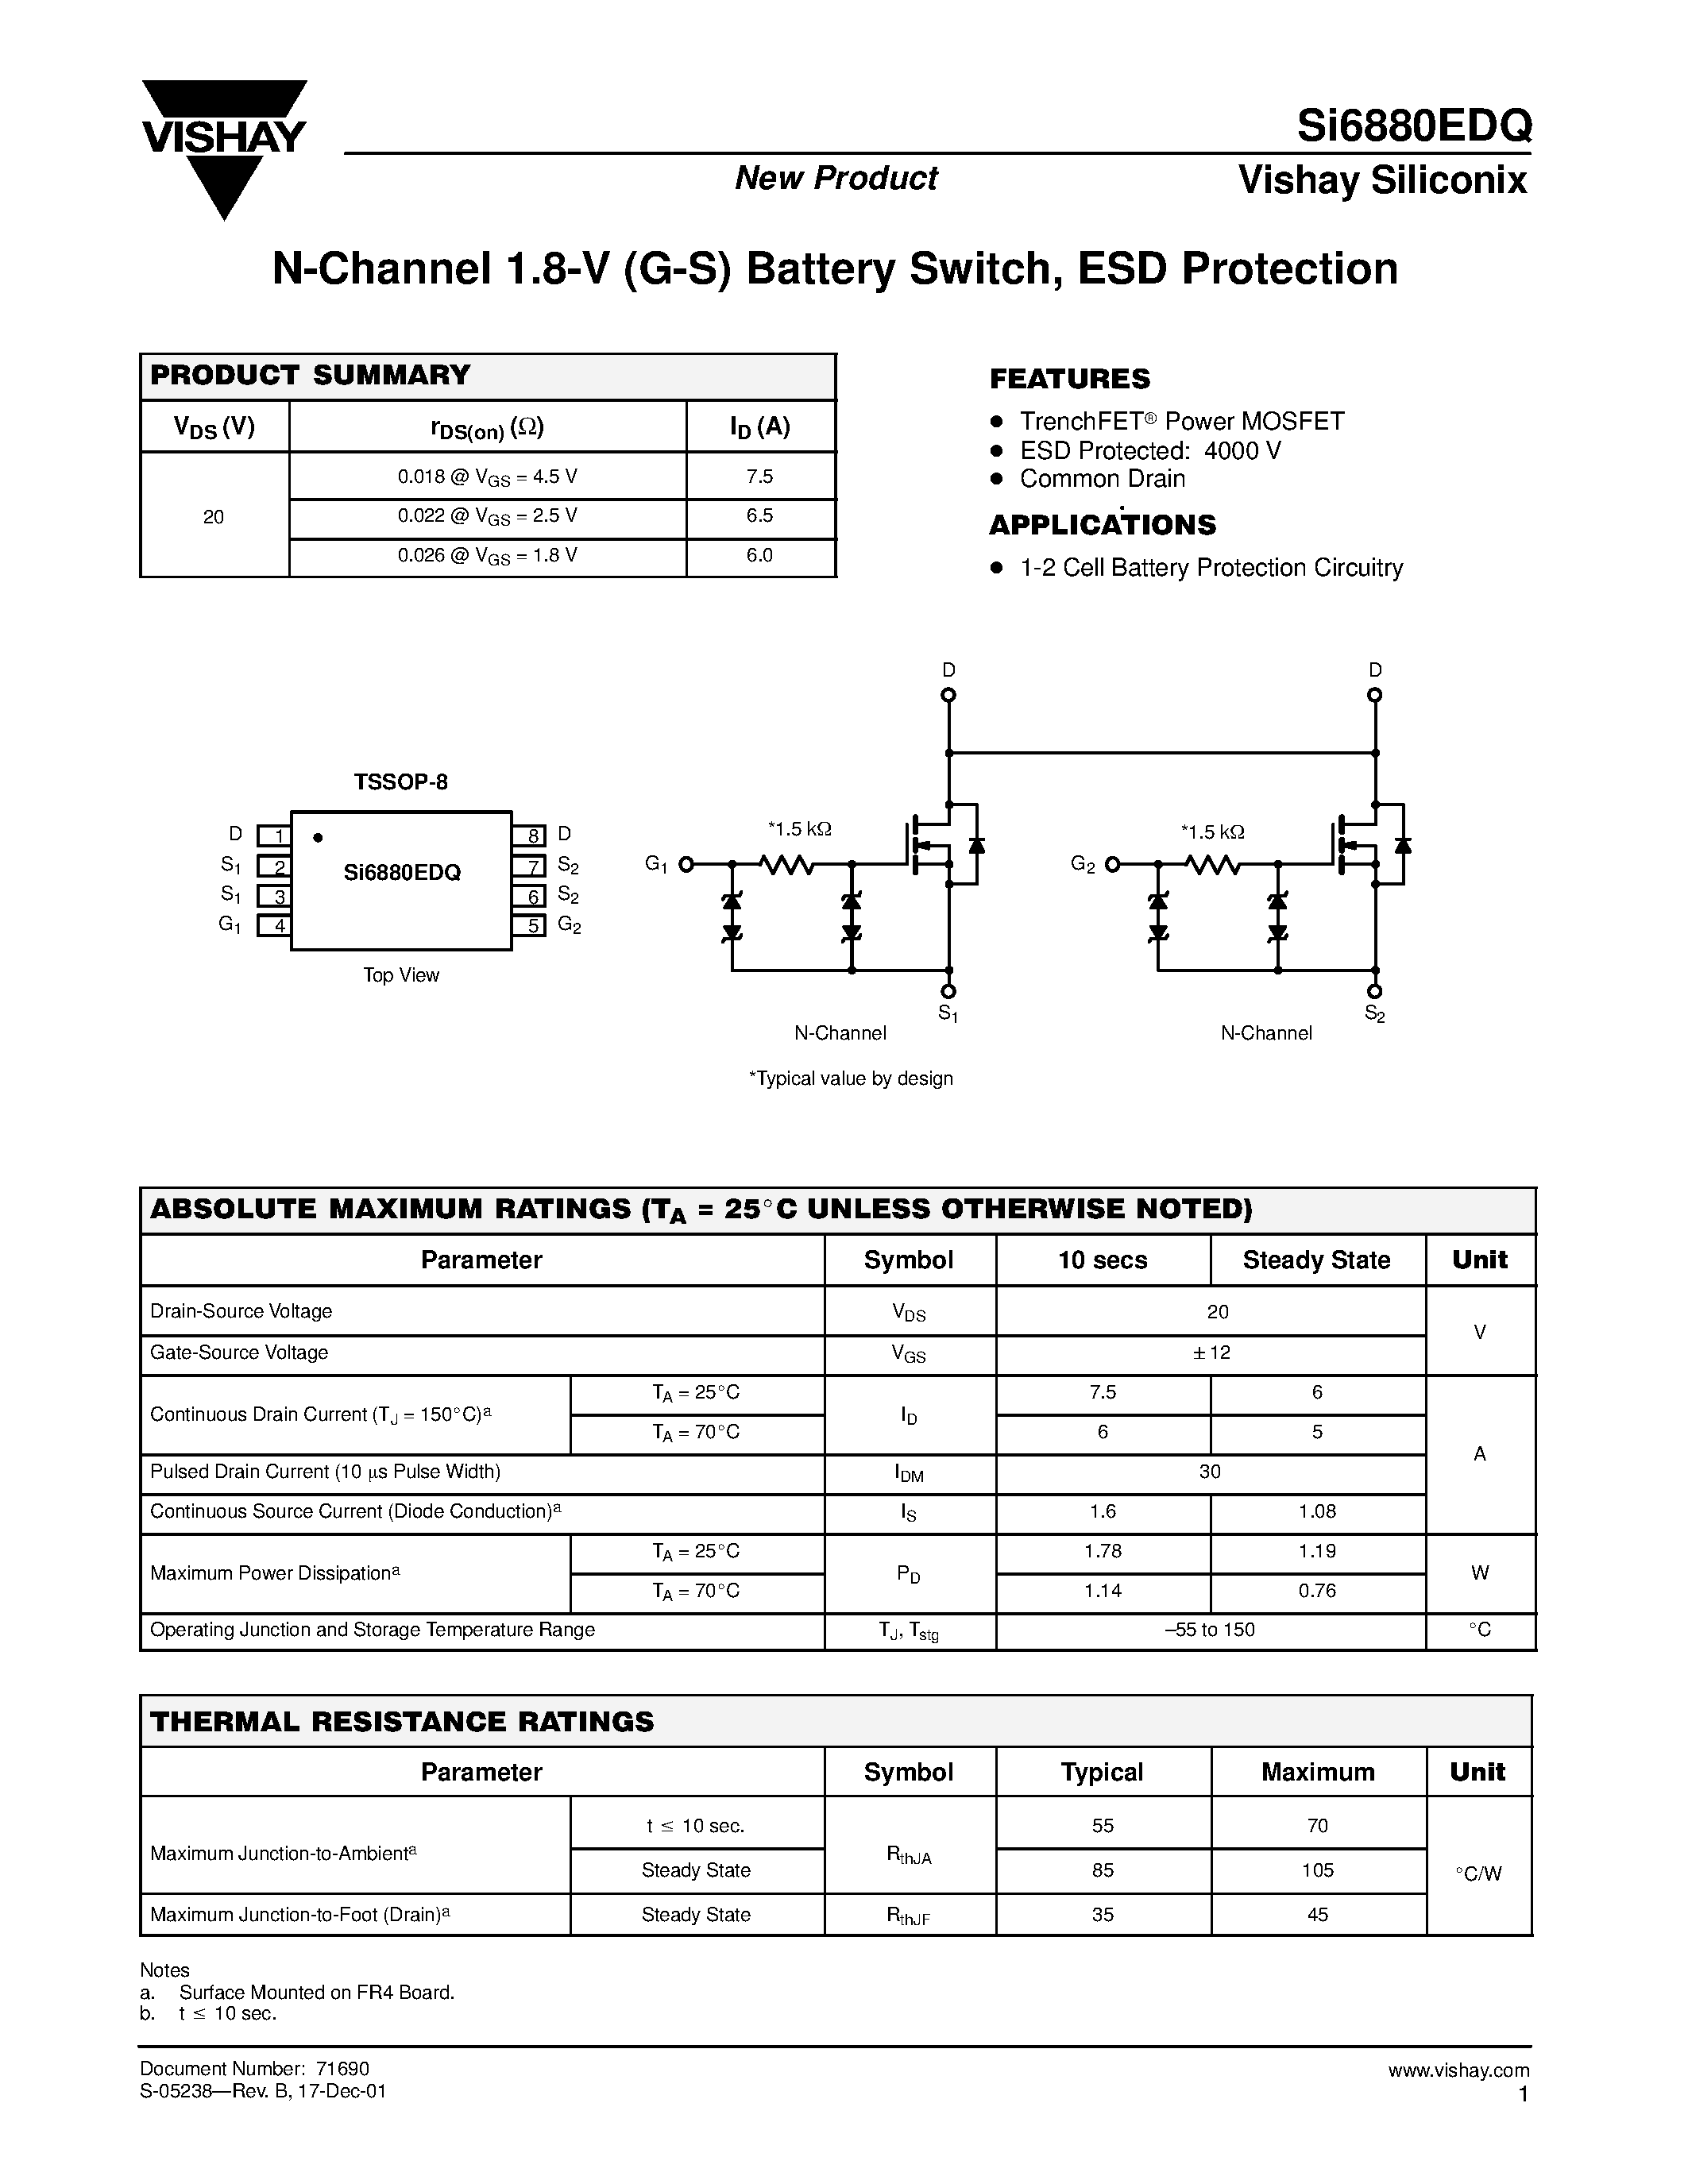 Даташит SI6880EDQ - N-Channel 1.8-V (G-S) Battery Switch/ ESD Protection страница 1